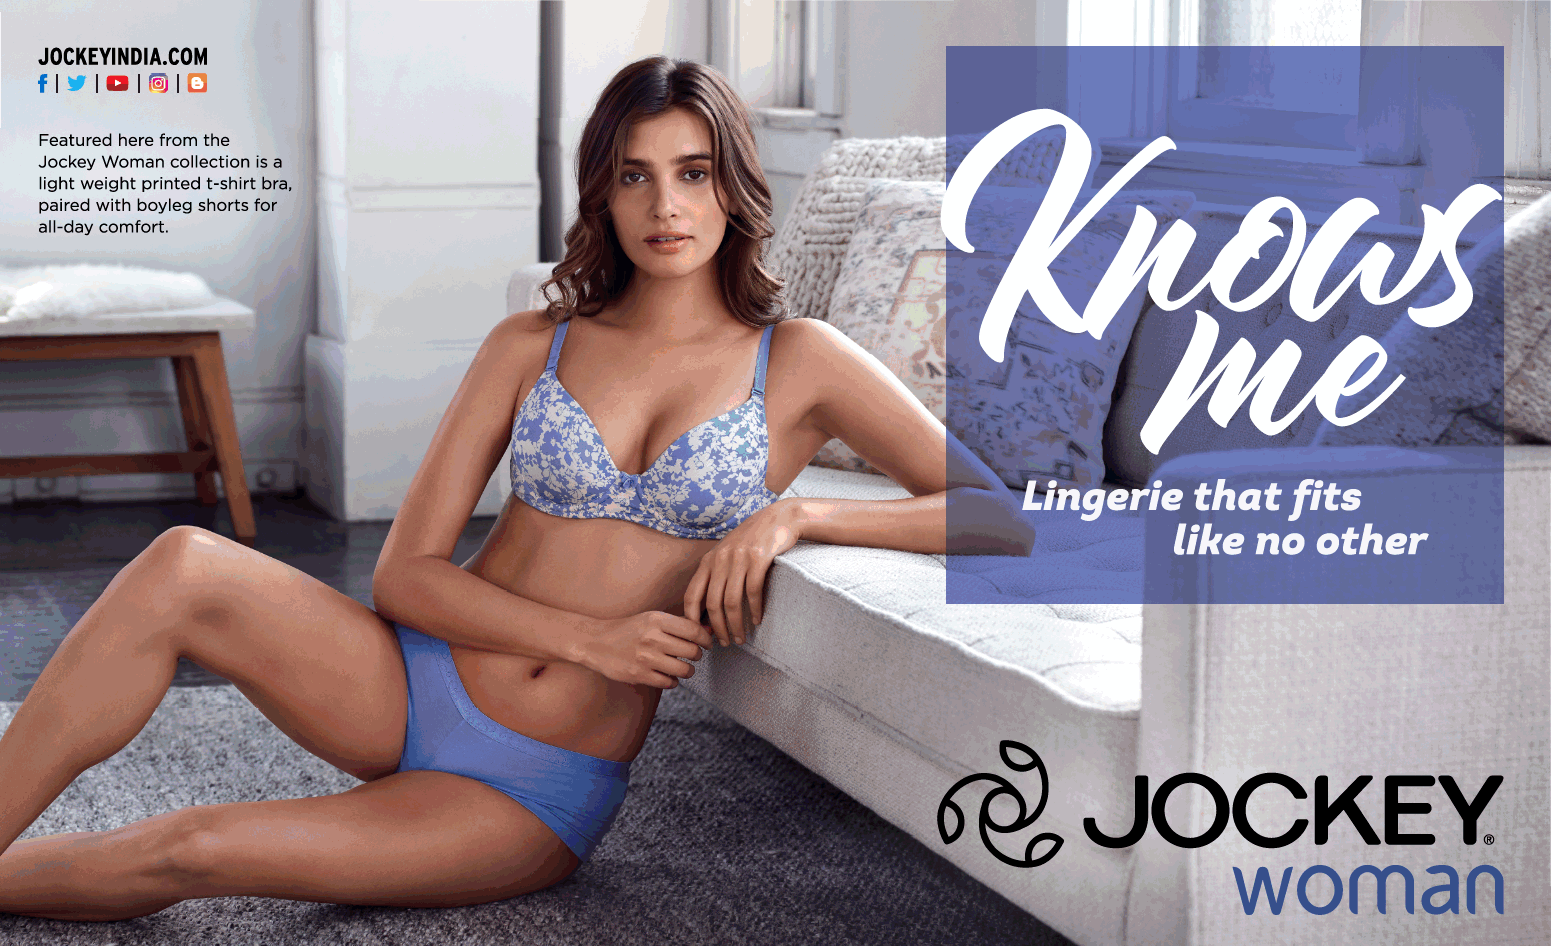 jockey-woman-knows-me-lingerie-that-fits-like-no-other-ad-bombay-times-04-04-2019.png